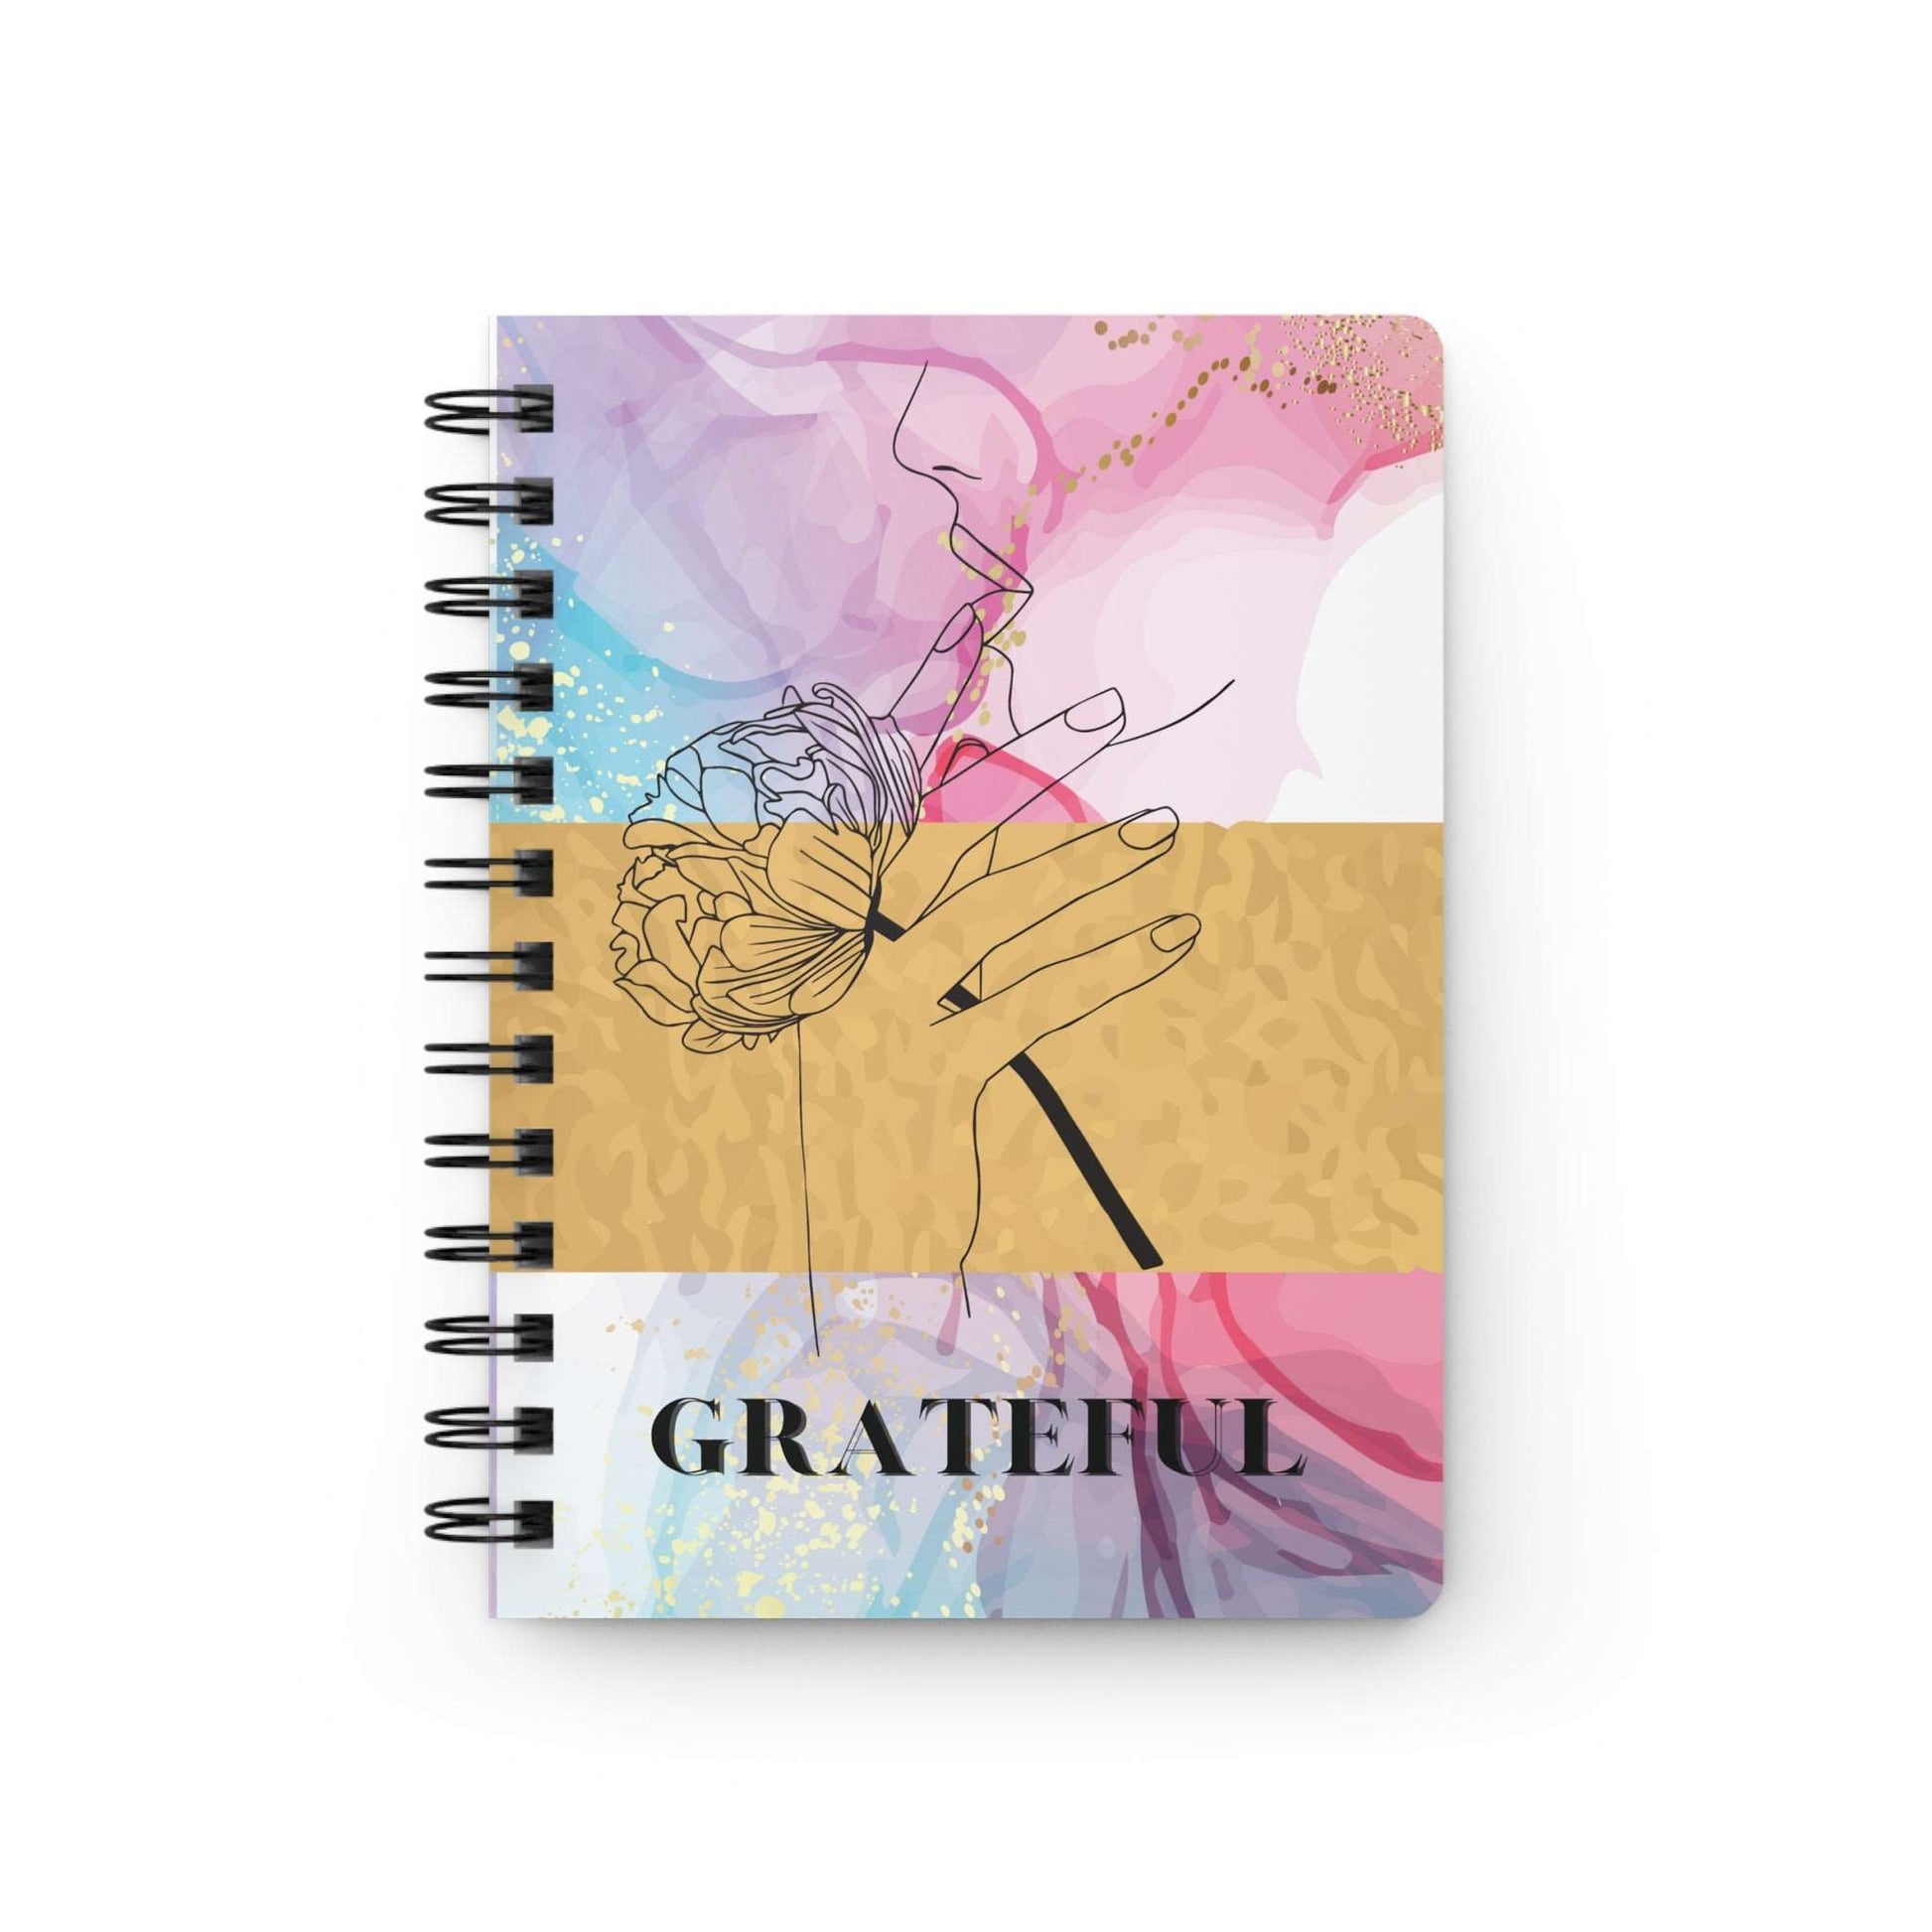 A colorful spiral notebook, the Grateful Journal, perfect for an attitude of gratitude.